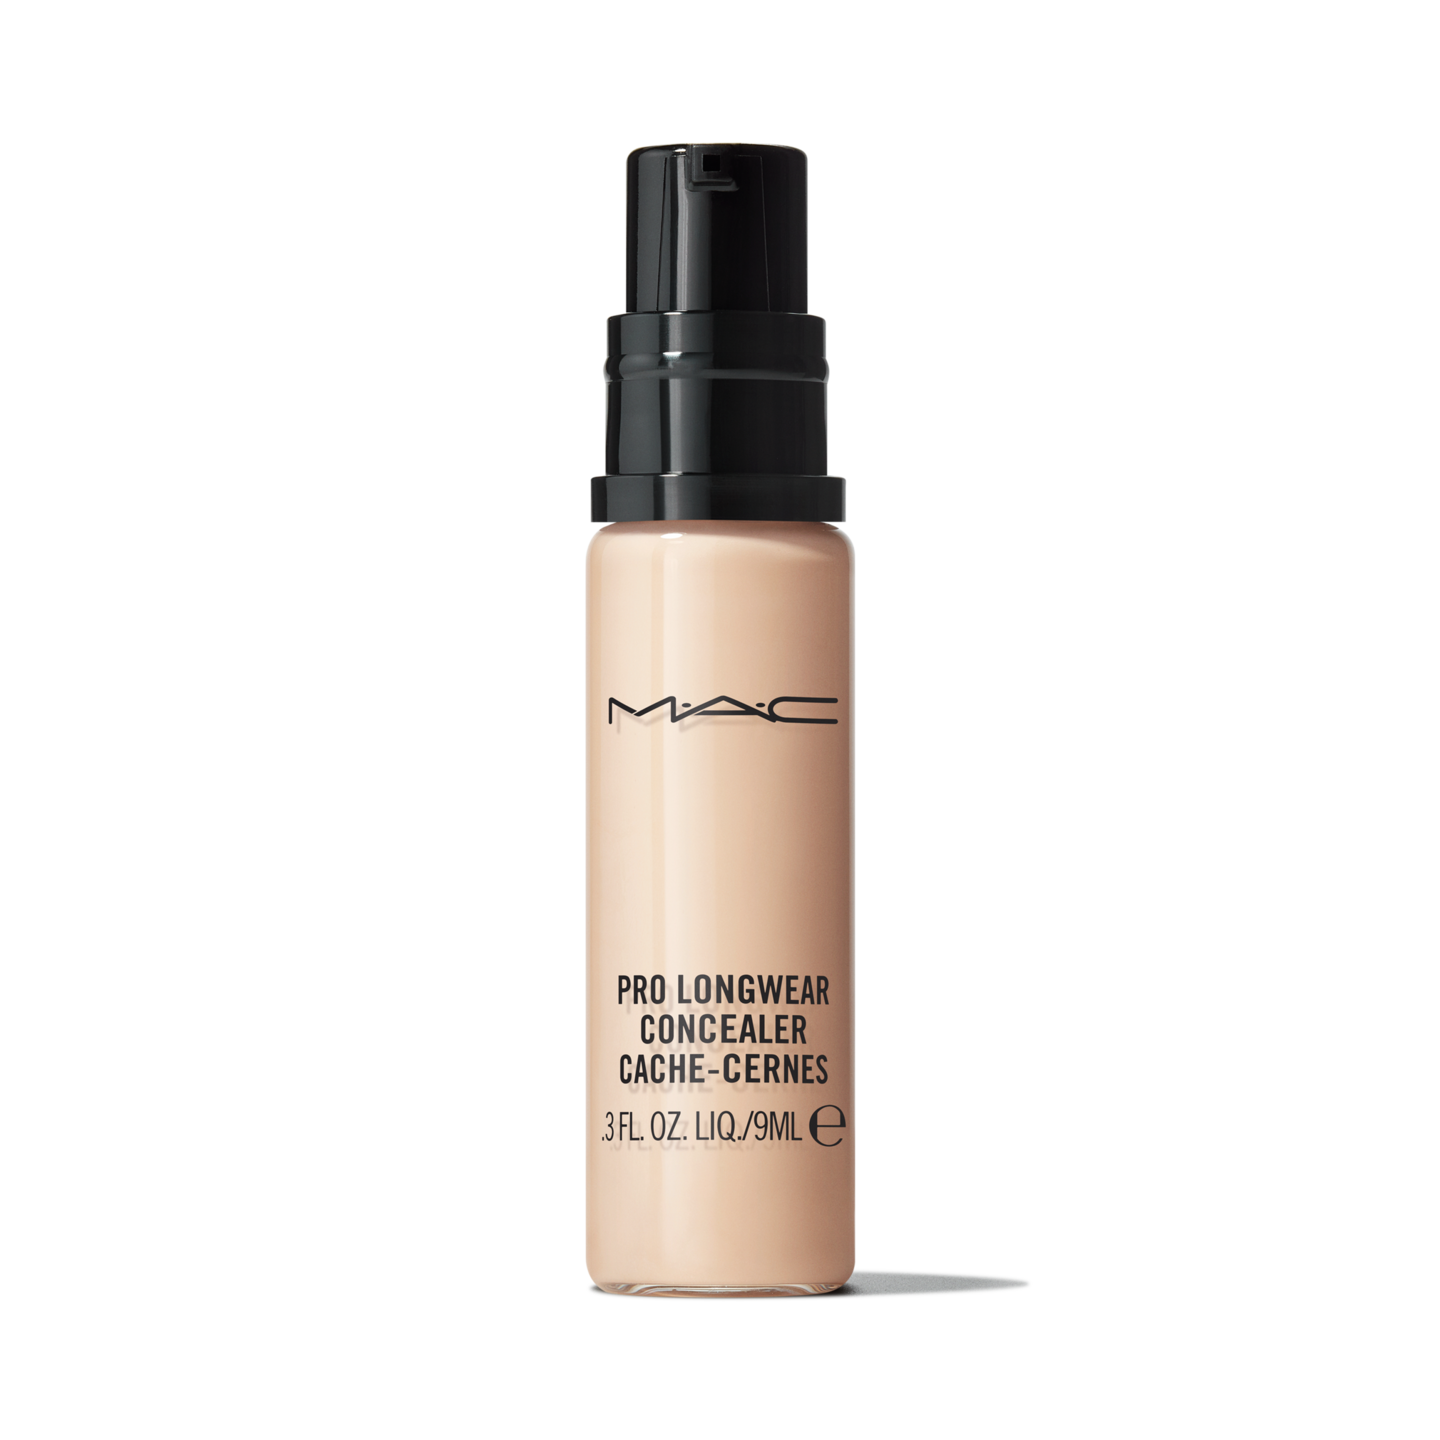 tredobbelt Citere Tage med Pro Longwear Concealer – Full Coverage | MAC Cosmetics - Official Site